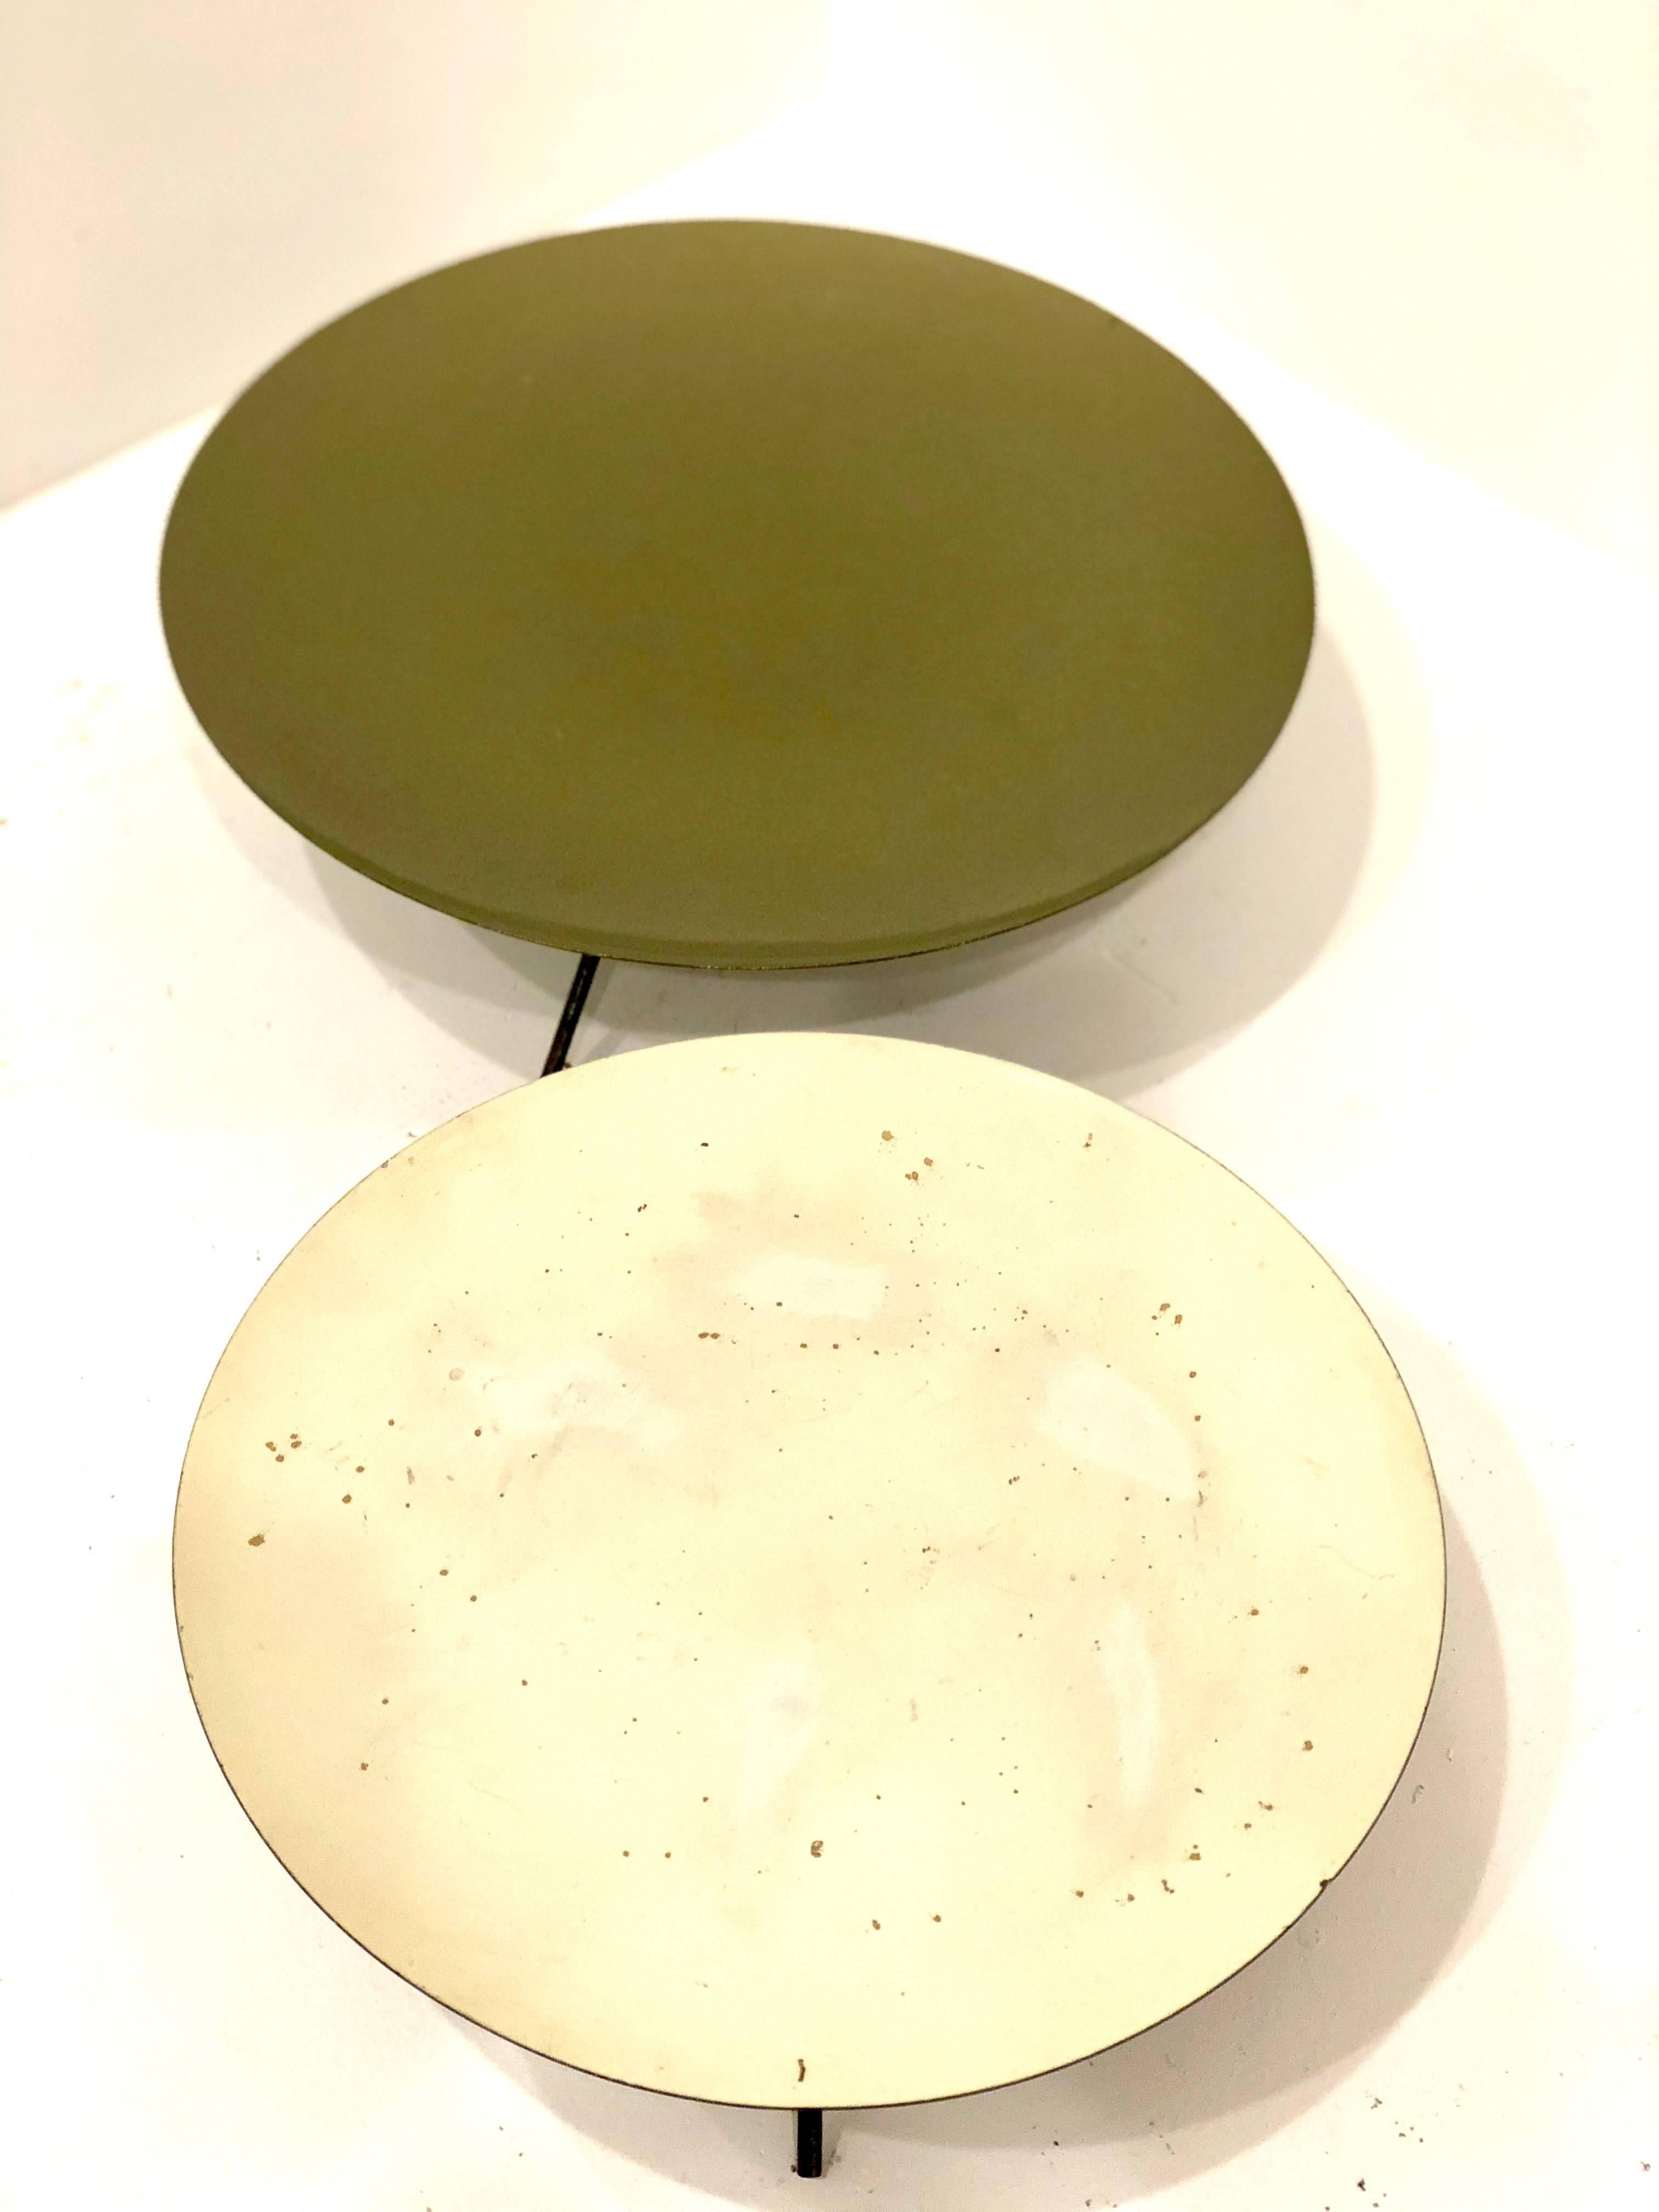 American Pair of Atomic Age Enameled Metal Serving Trays by Trend of California Design